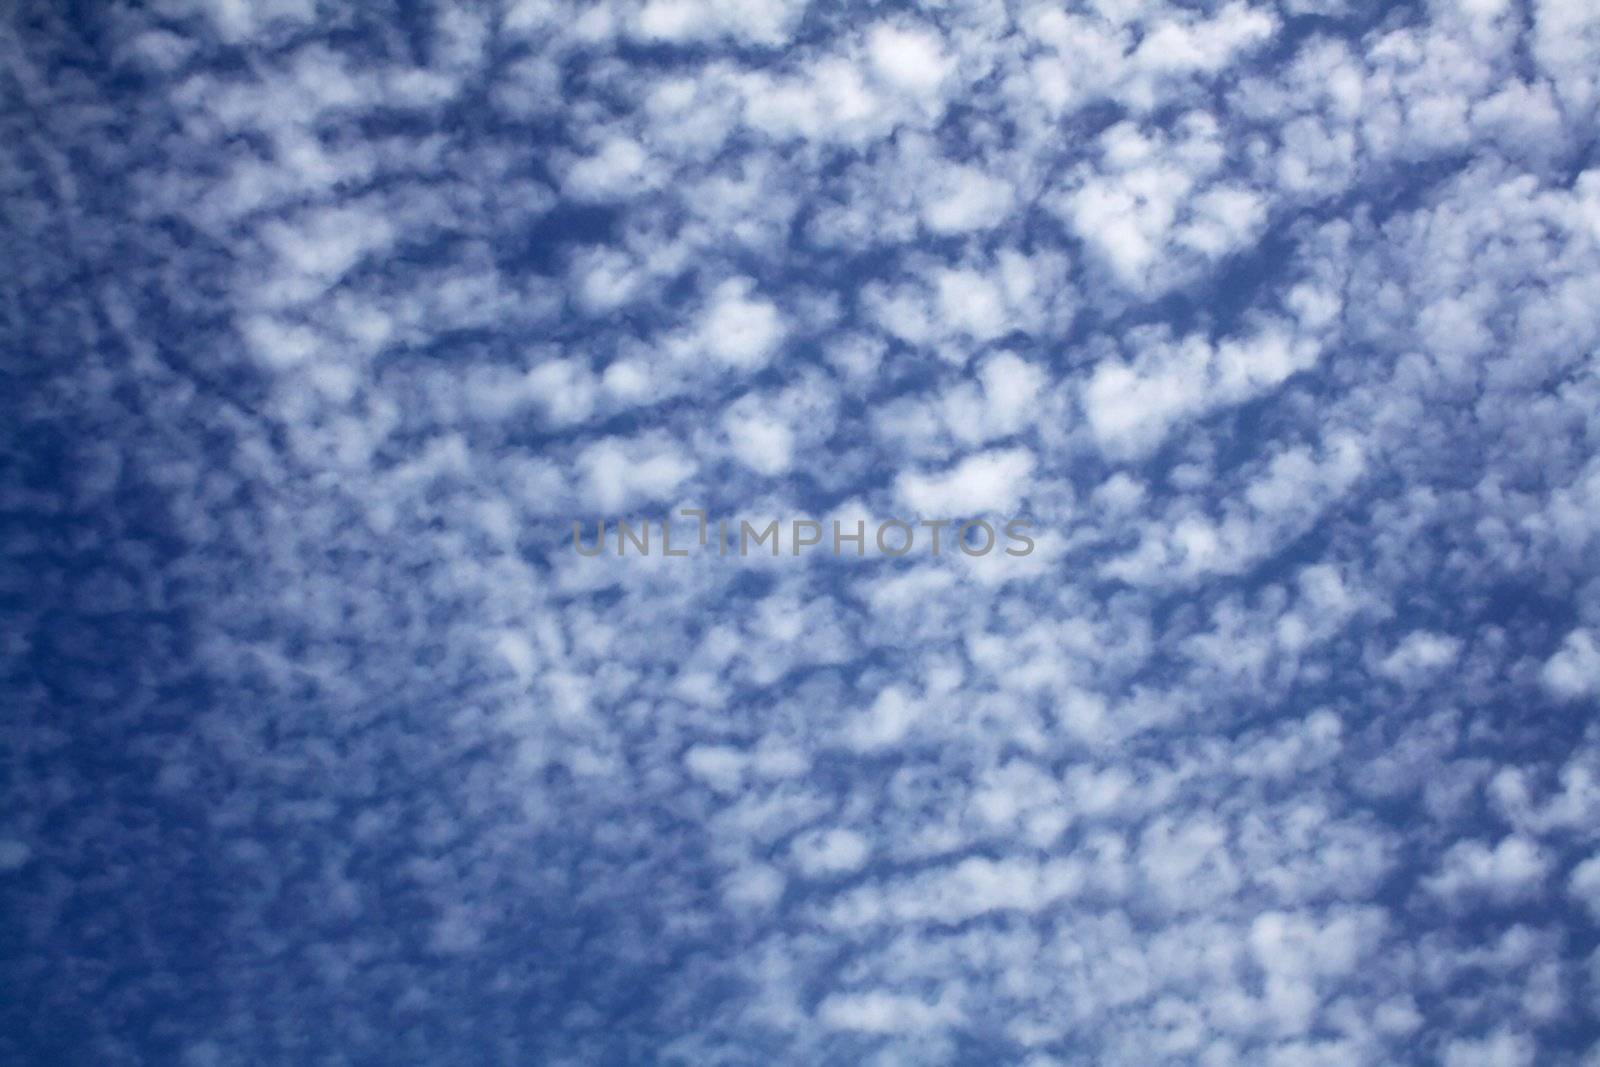 Clouds scattered over a blue sky